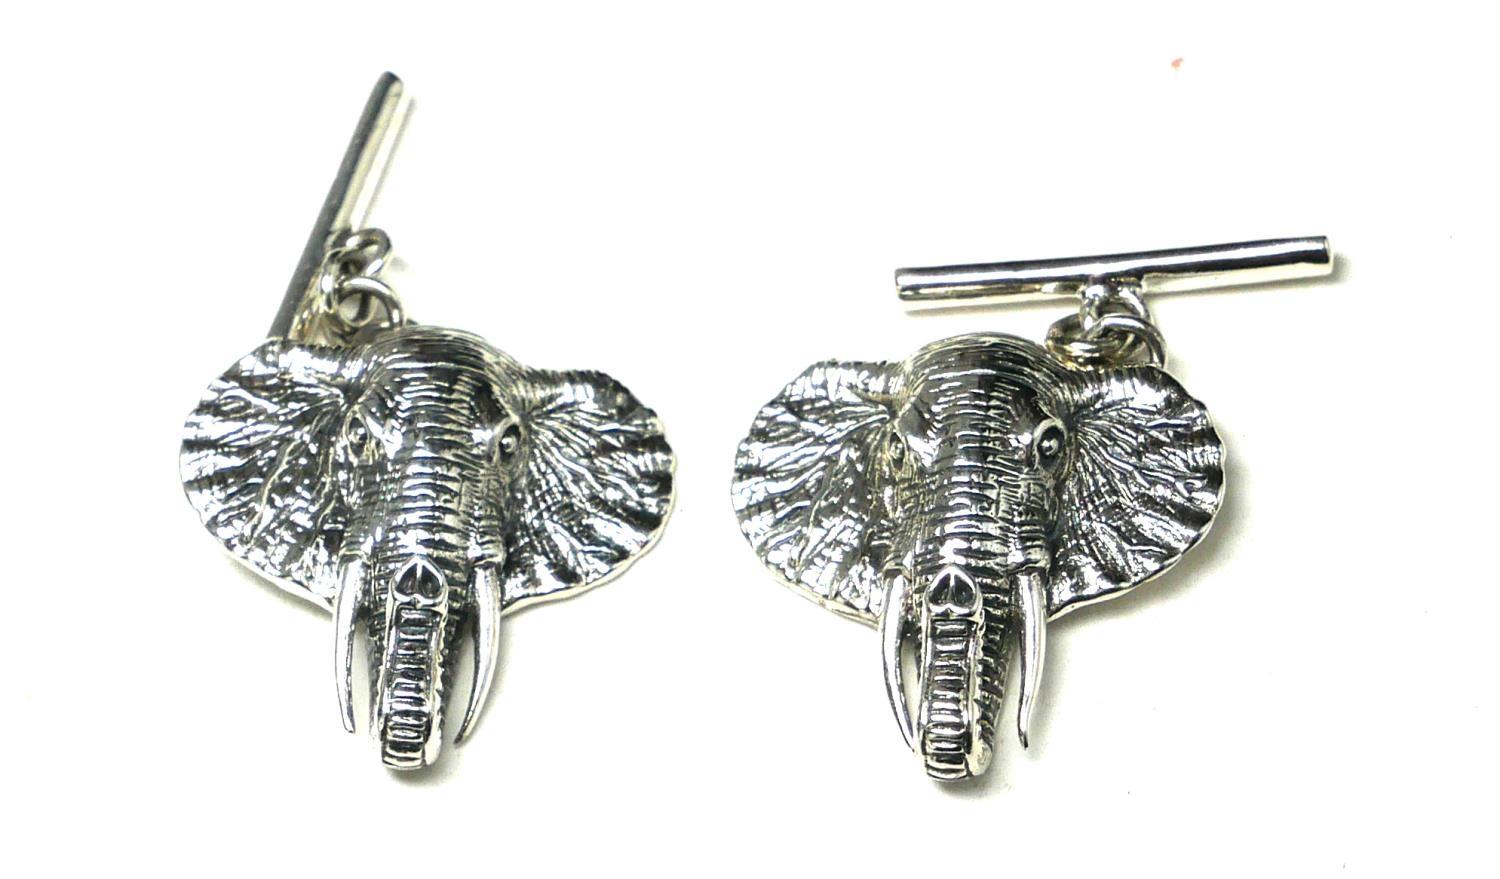 A PAIR OF STERLING SILVER NOVELTY 'ELEPHANT HEAD' CUFFLINKS With chain and bar. (approx 2cm) - Image 2 of 2